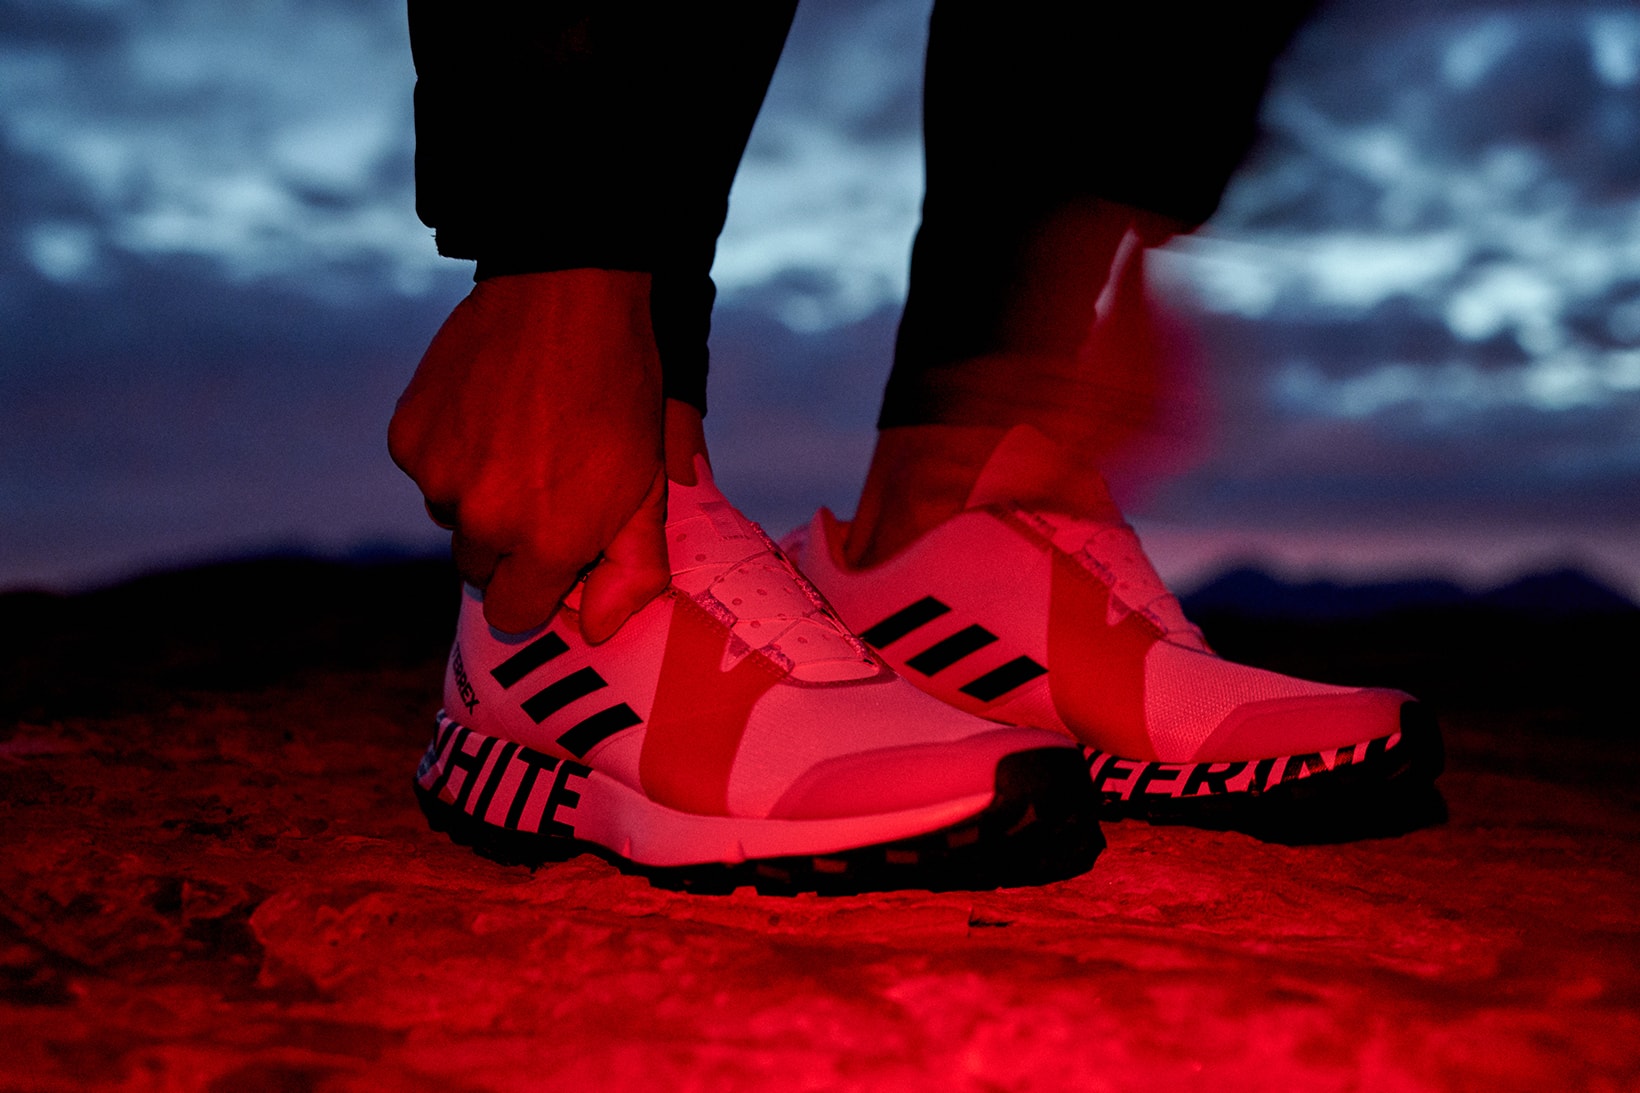 adidas TERREX x White Mountaineering SS18 Spring/Summer 2018 Collection Sneakers WM TERREX TWO BOA Trail Runner